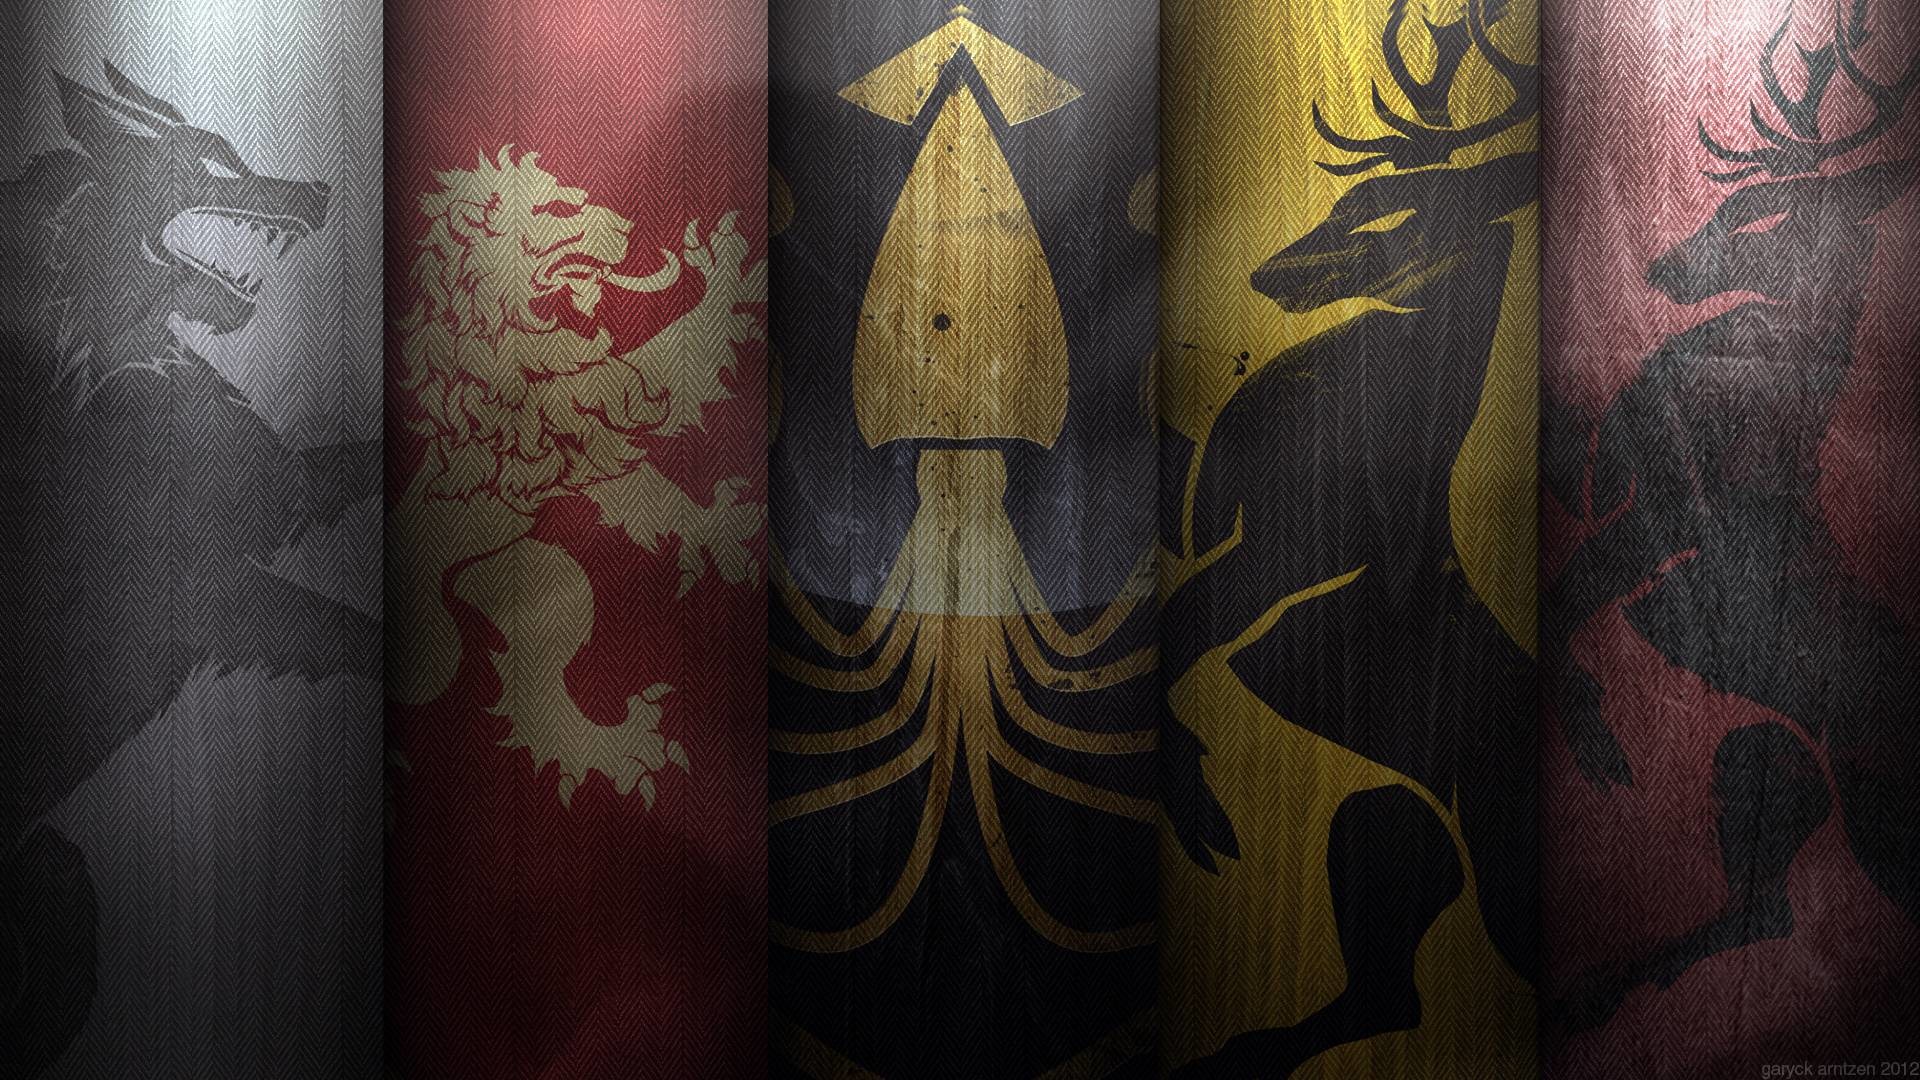 1920x1080 Want some Game of Thrones wallpapers? You're goddam right you do.